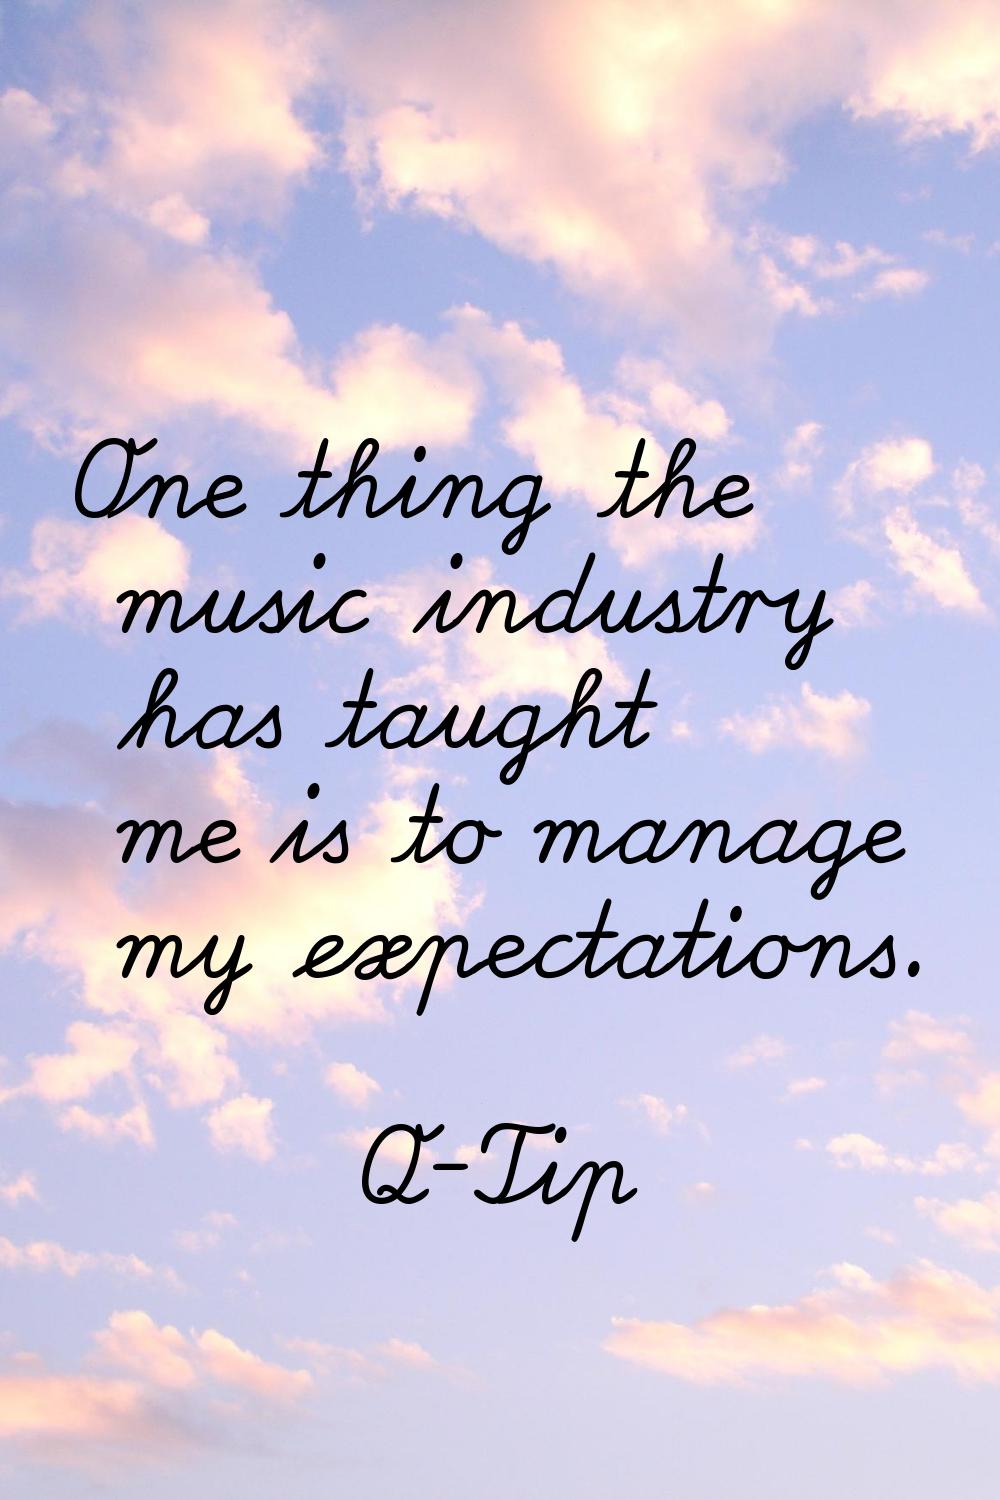 One thing the music industry has taught me is to manage my expectations.